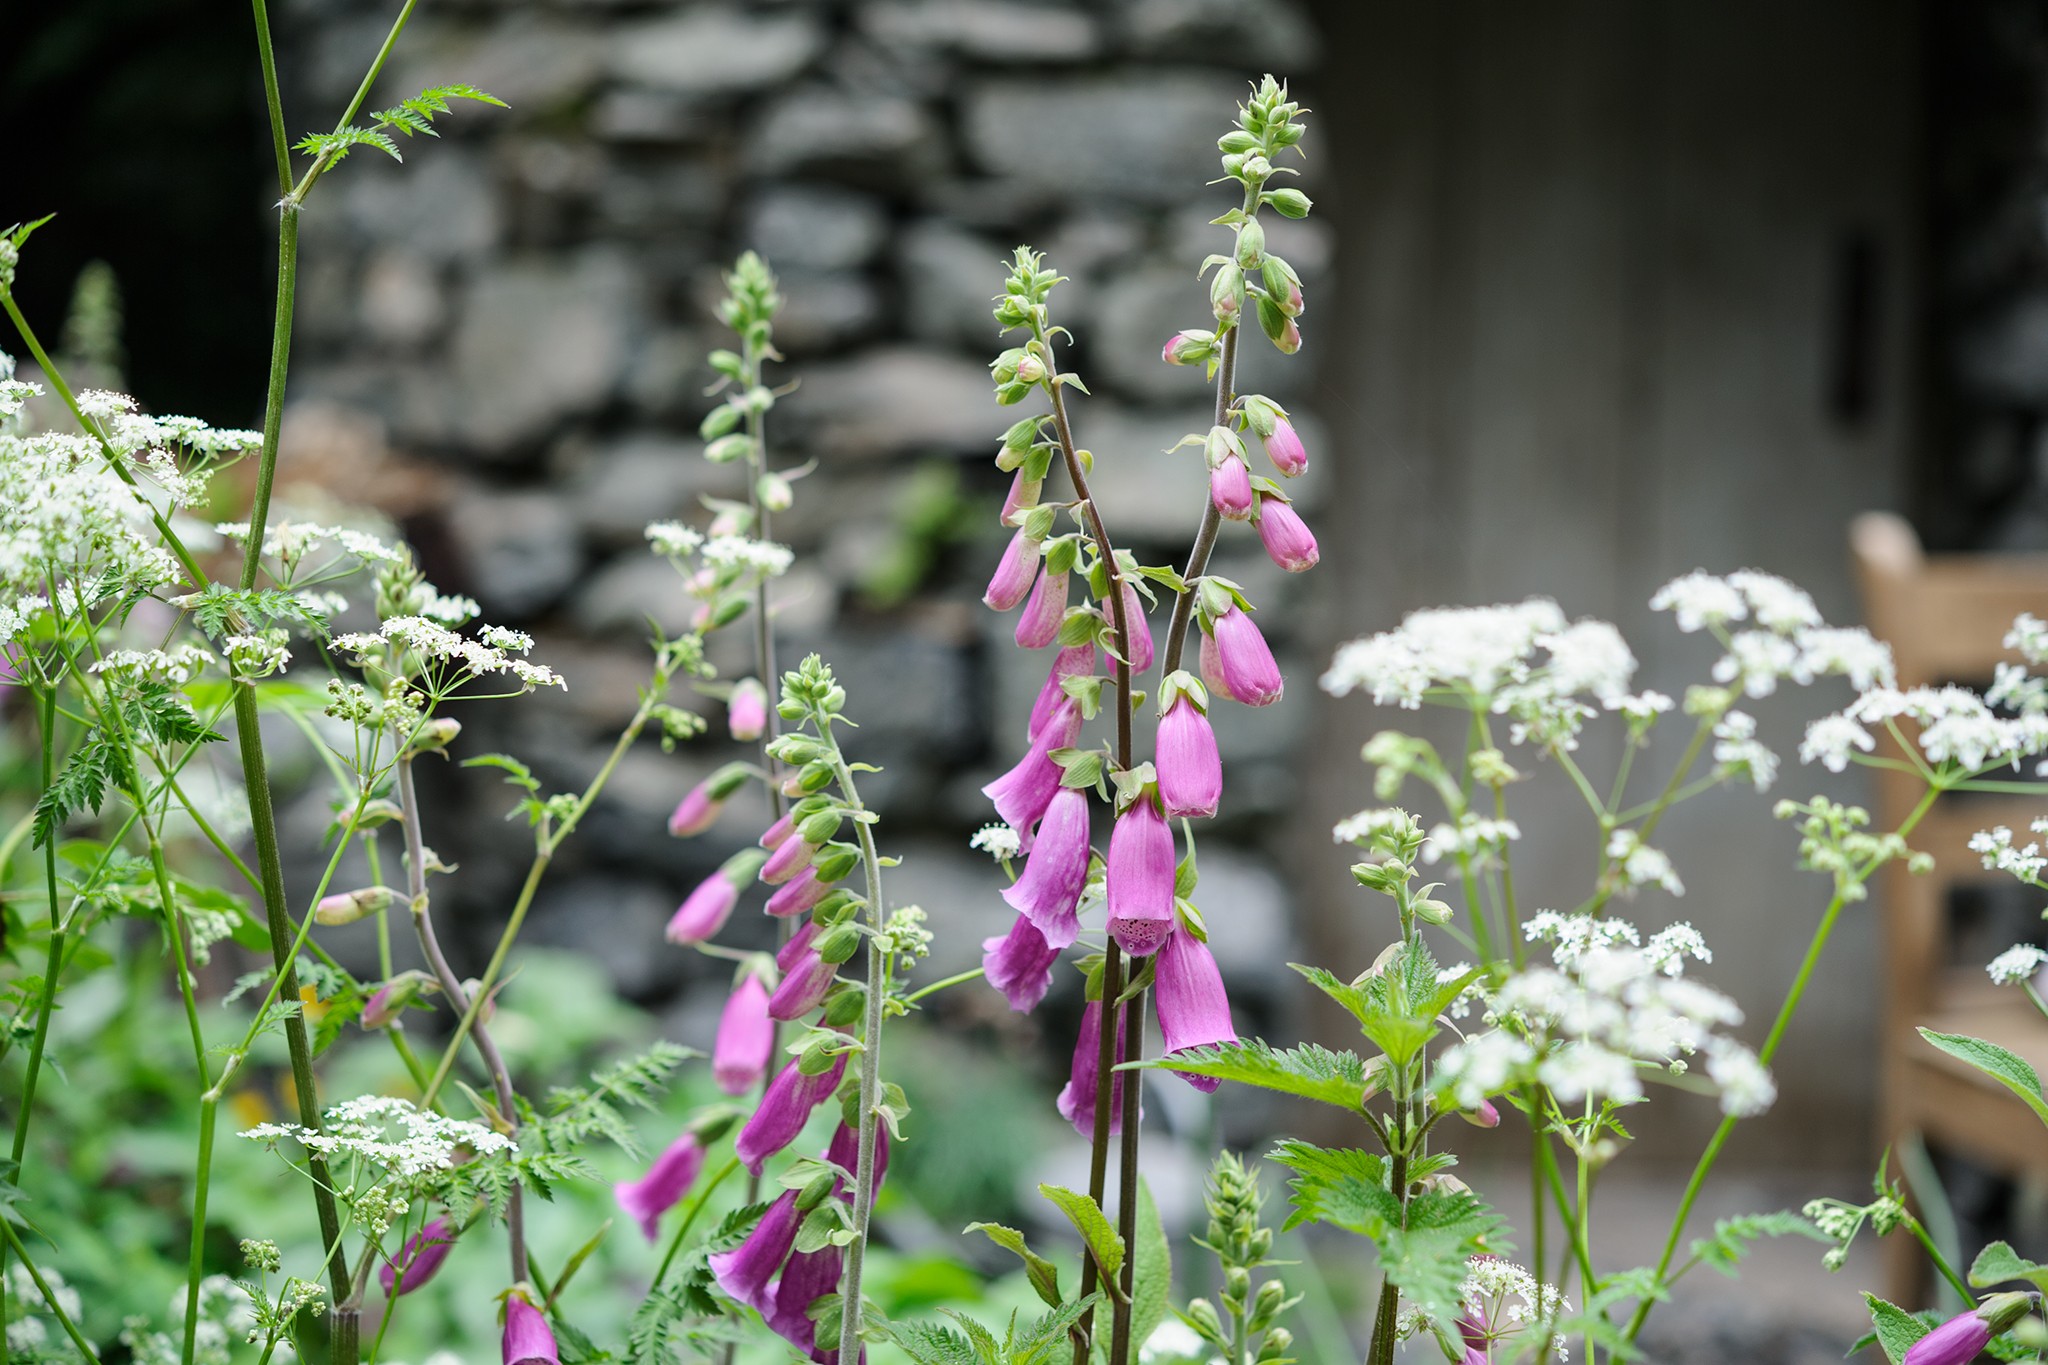 Foxgloves and cow parsley